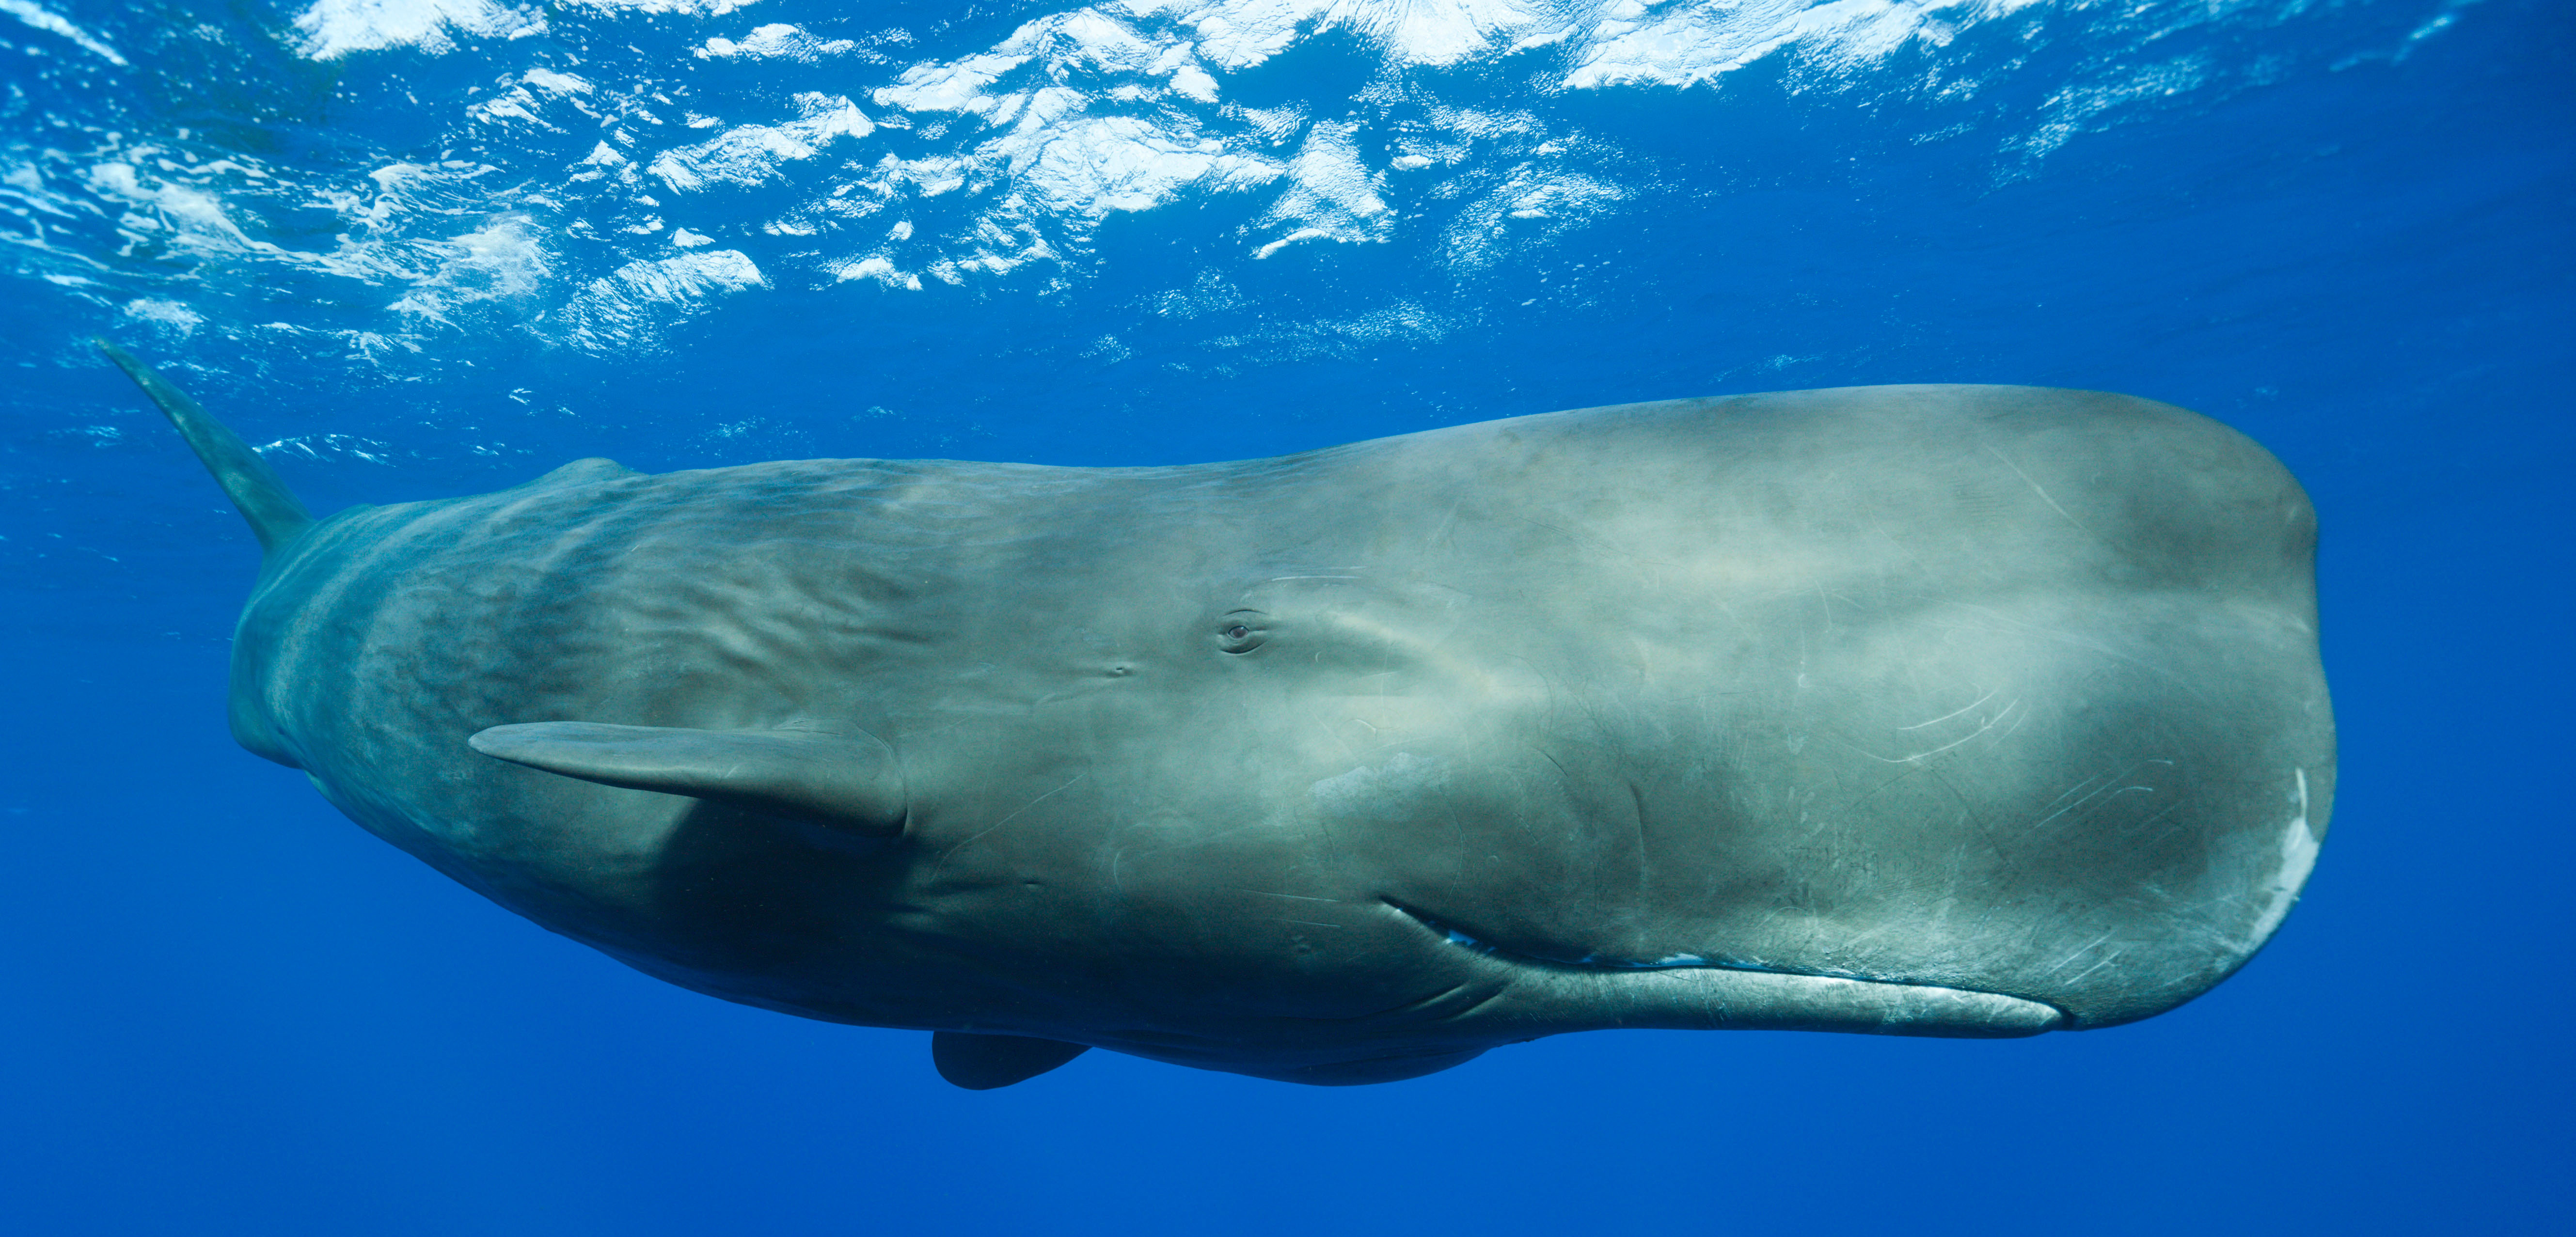 Sperm whale in Moby Dick Chapter 32: Cetology (summary).